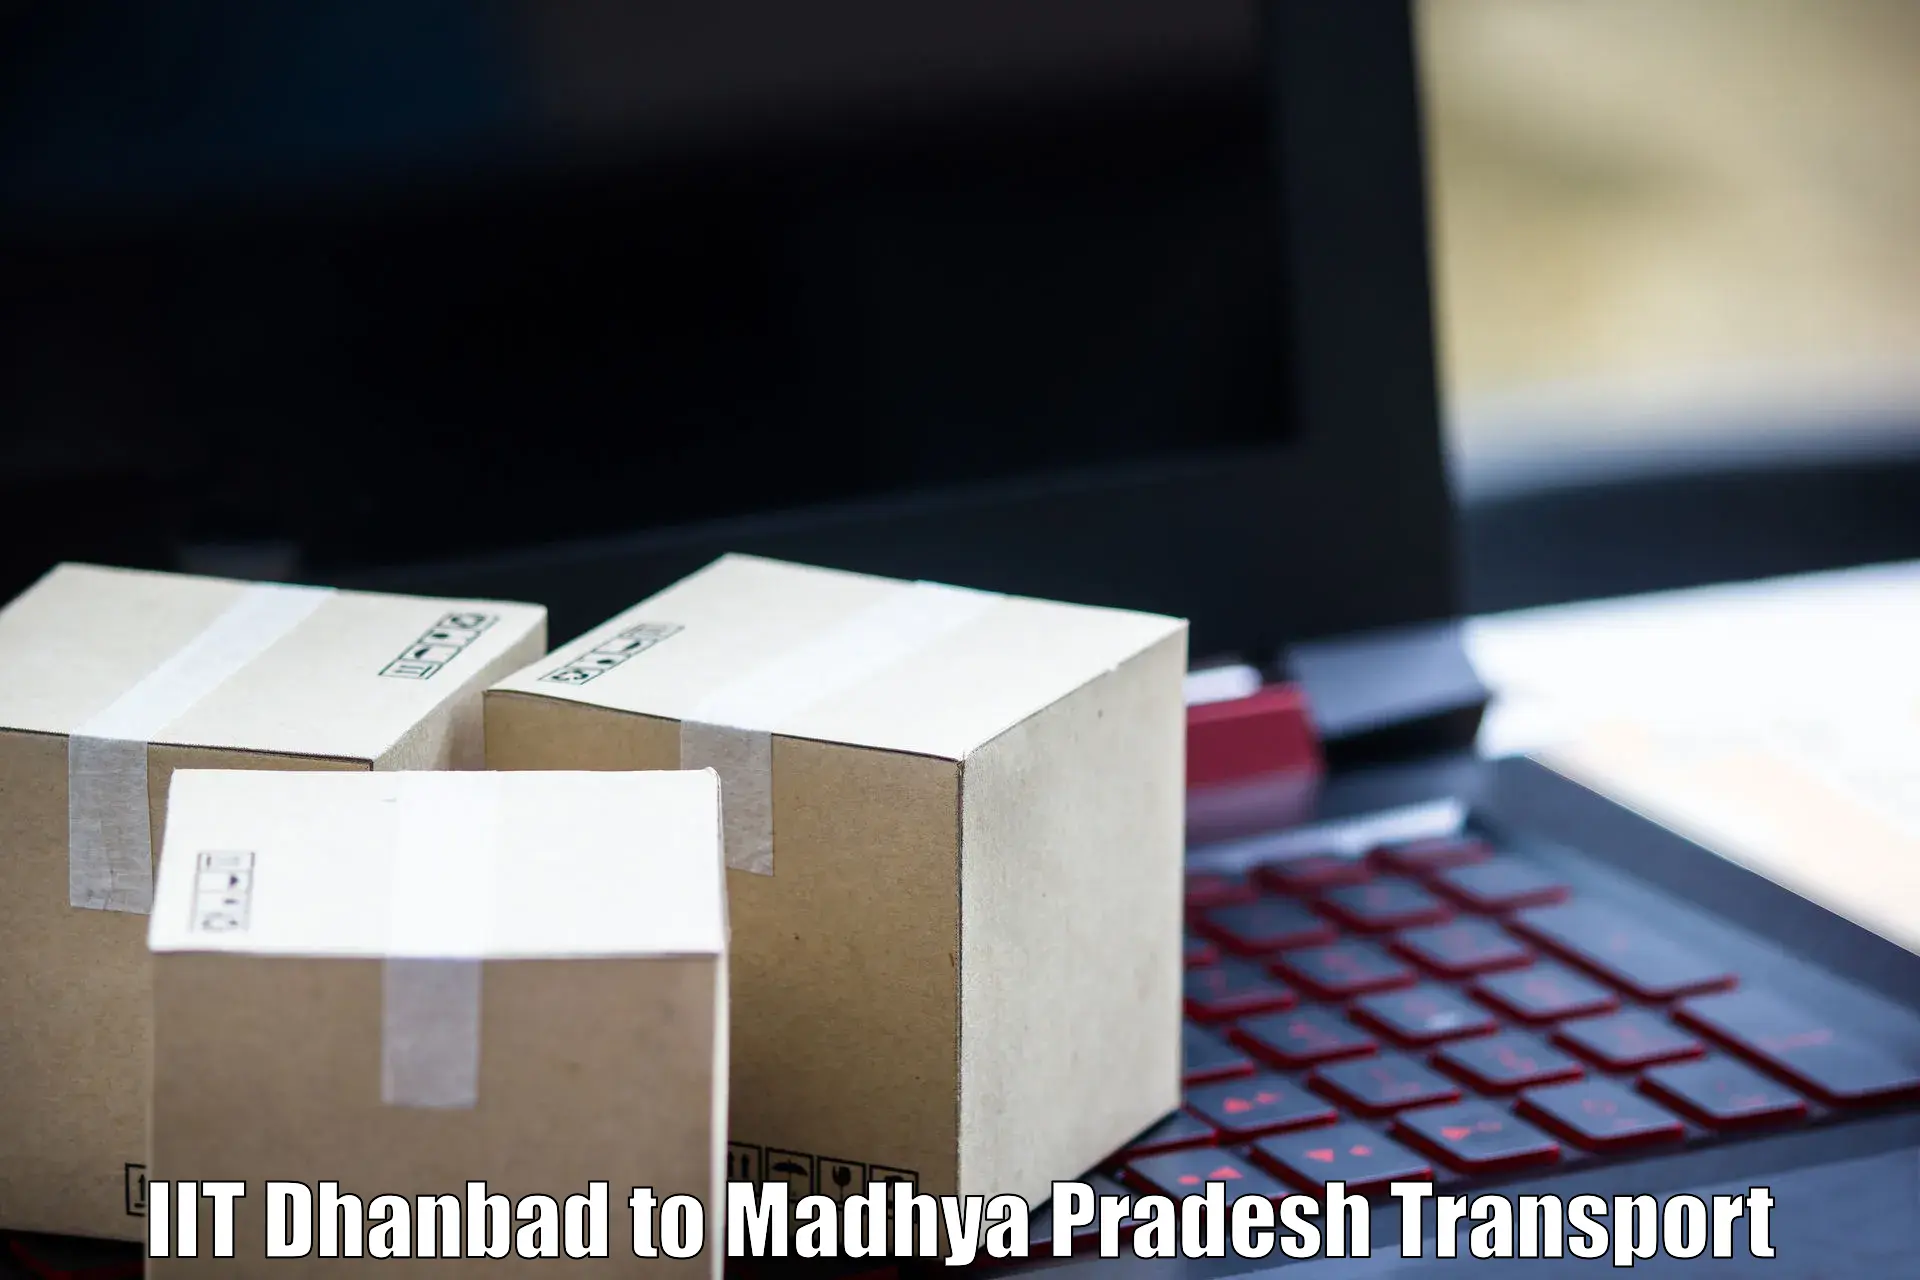 Daily parcel service transport IIT Dhanbad to Balaghat